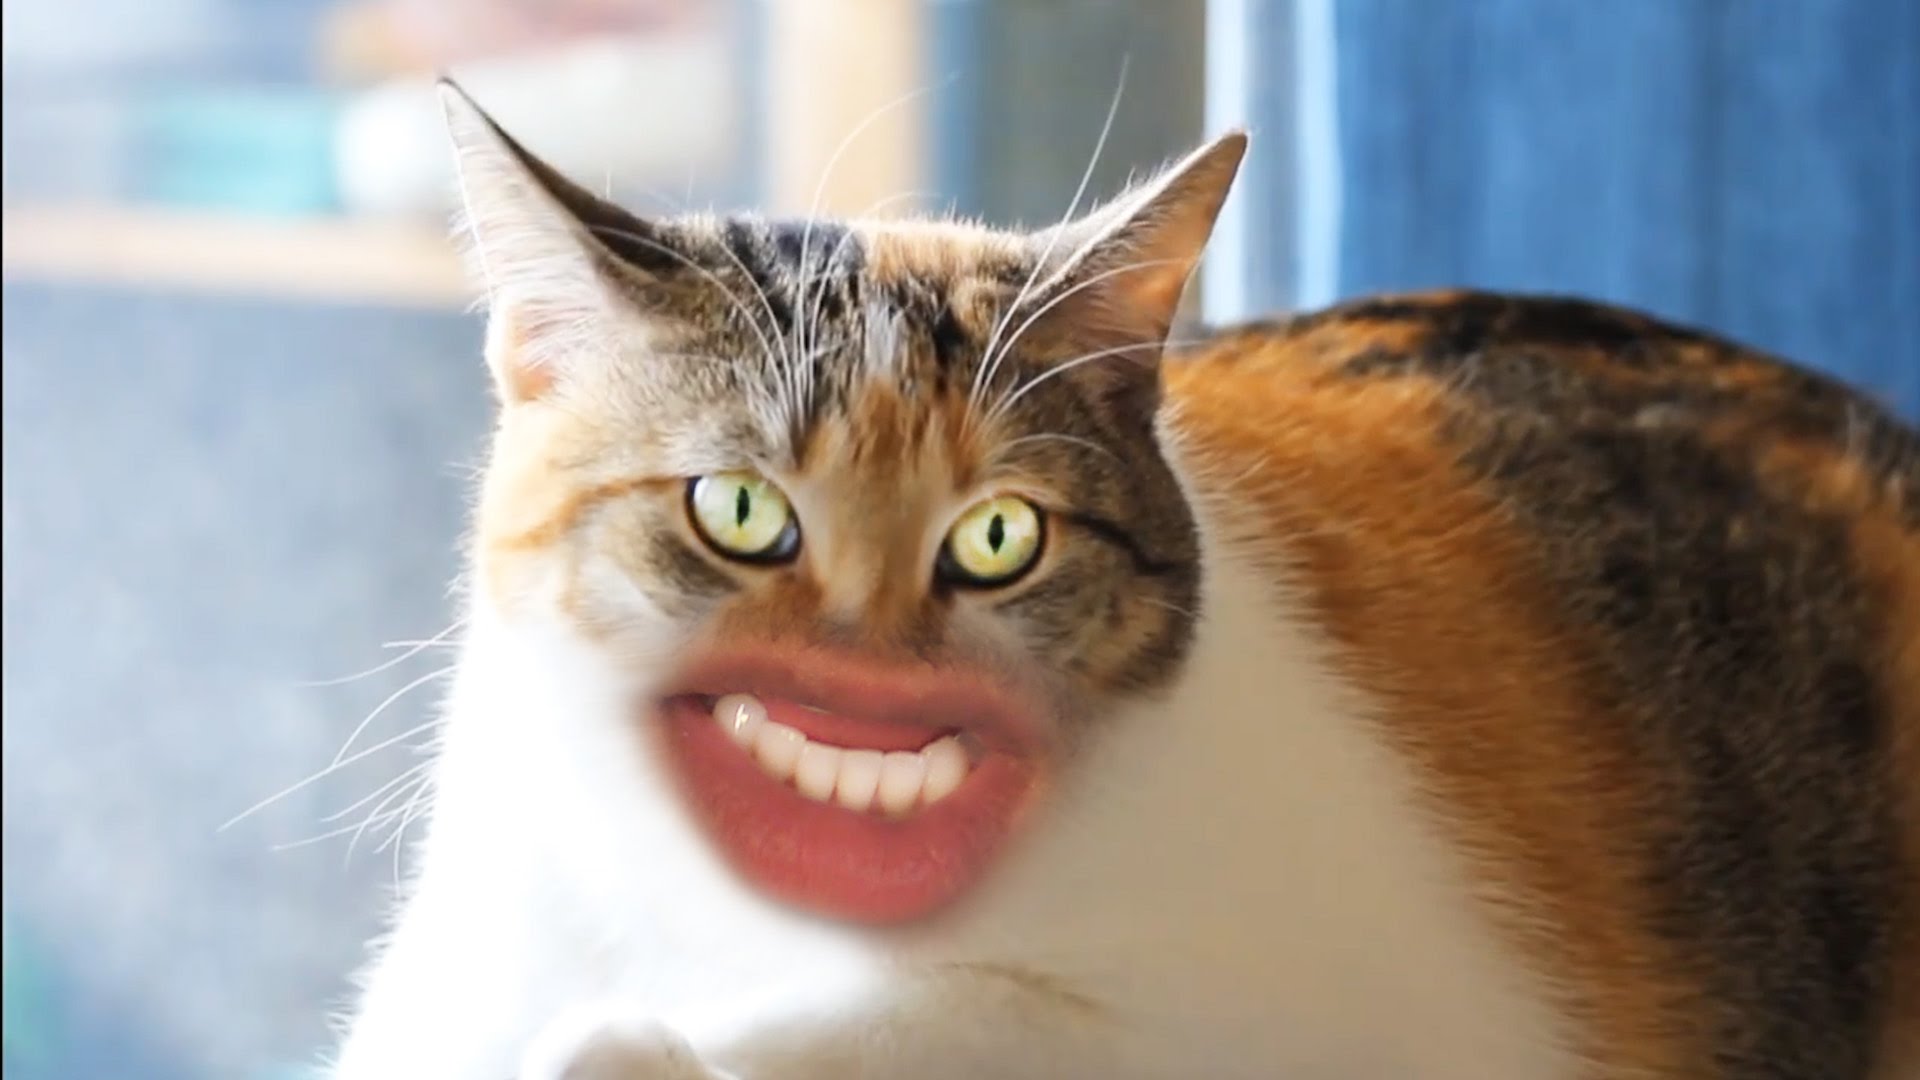 Markiplier created a ridiculous video featuring cats with human mouths atte...